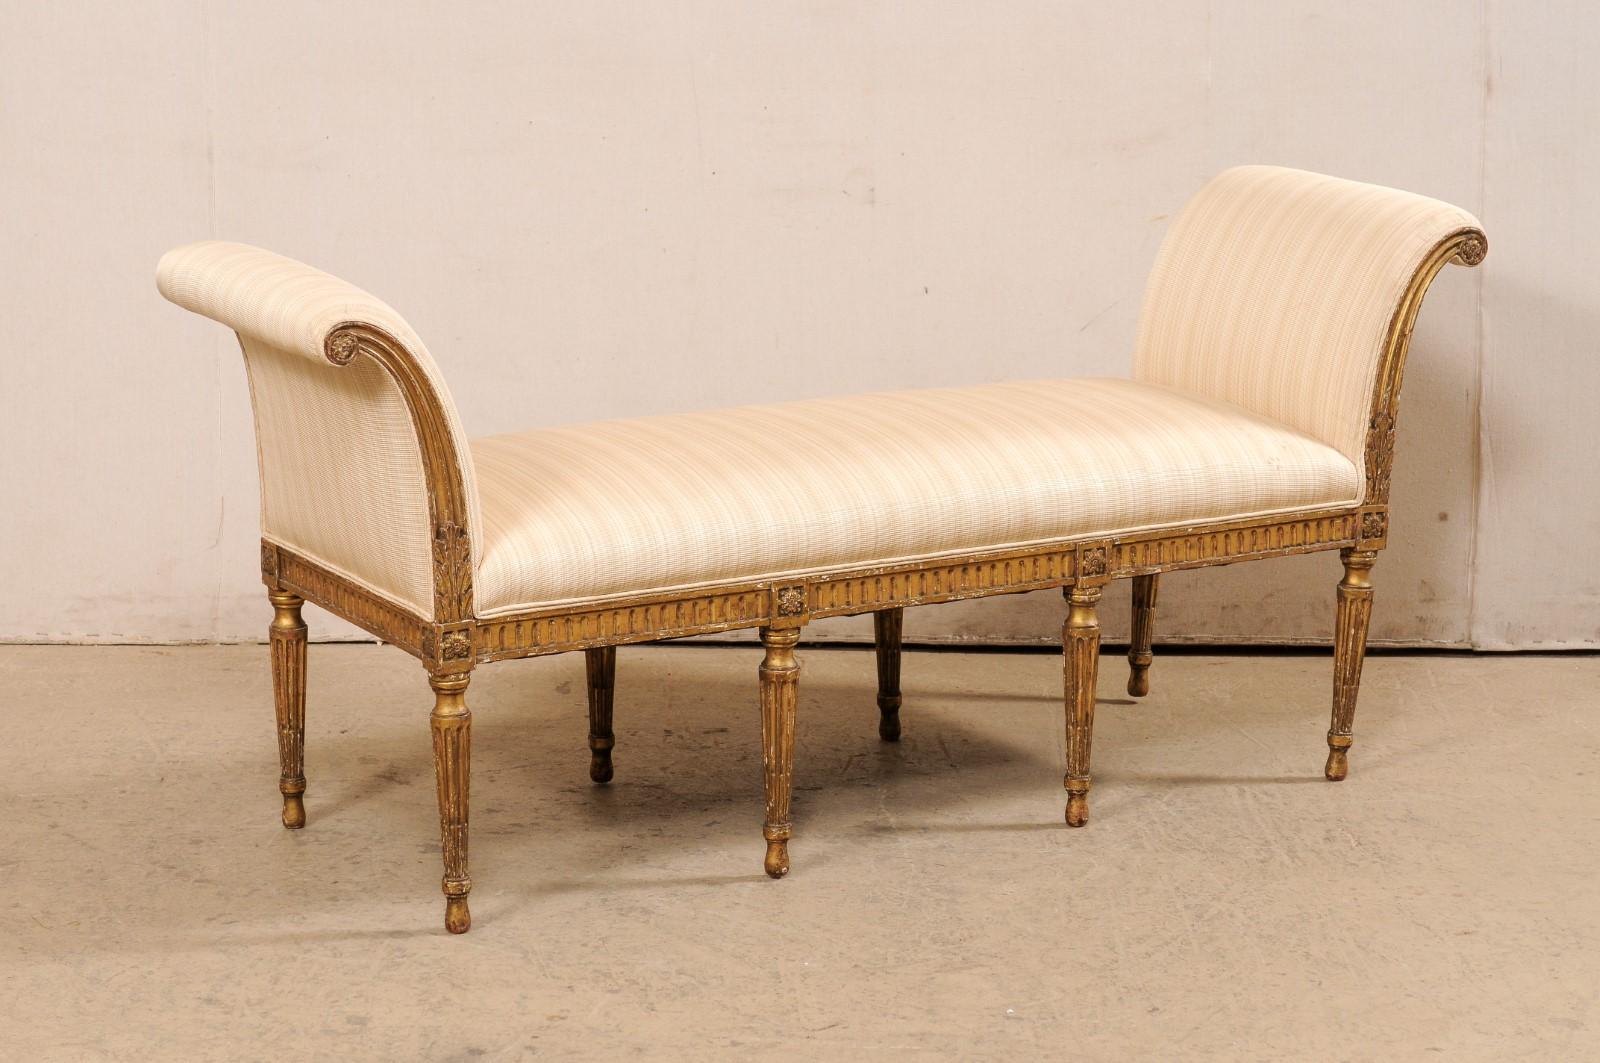 A French Louis XVI style carved wood and upholstered bench from the turn of the 19th and 20th century. This antique bench from France is backless, and is flanked with a pair of gracefully curved arms that terminate into scrolled volutes with floral